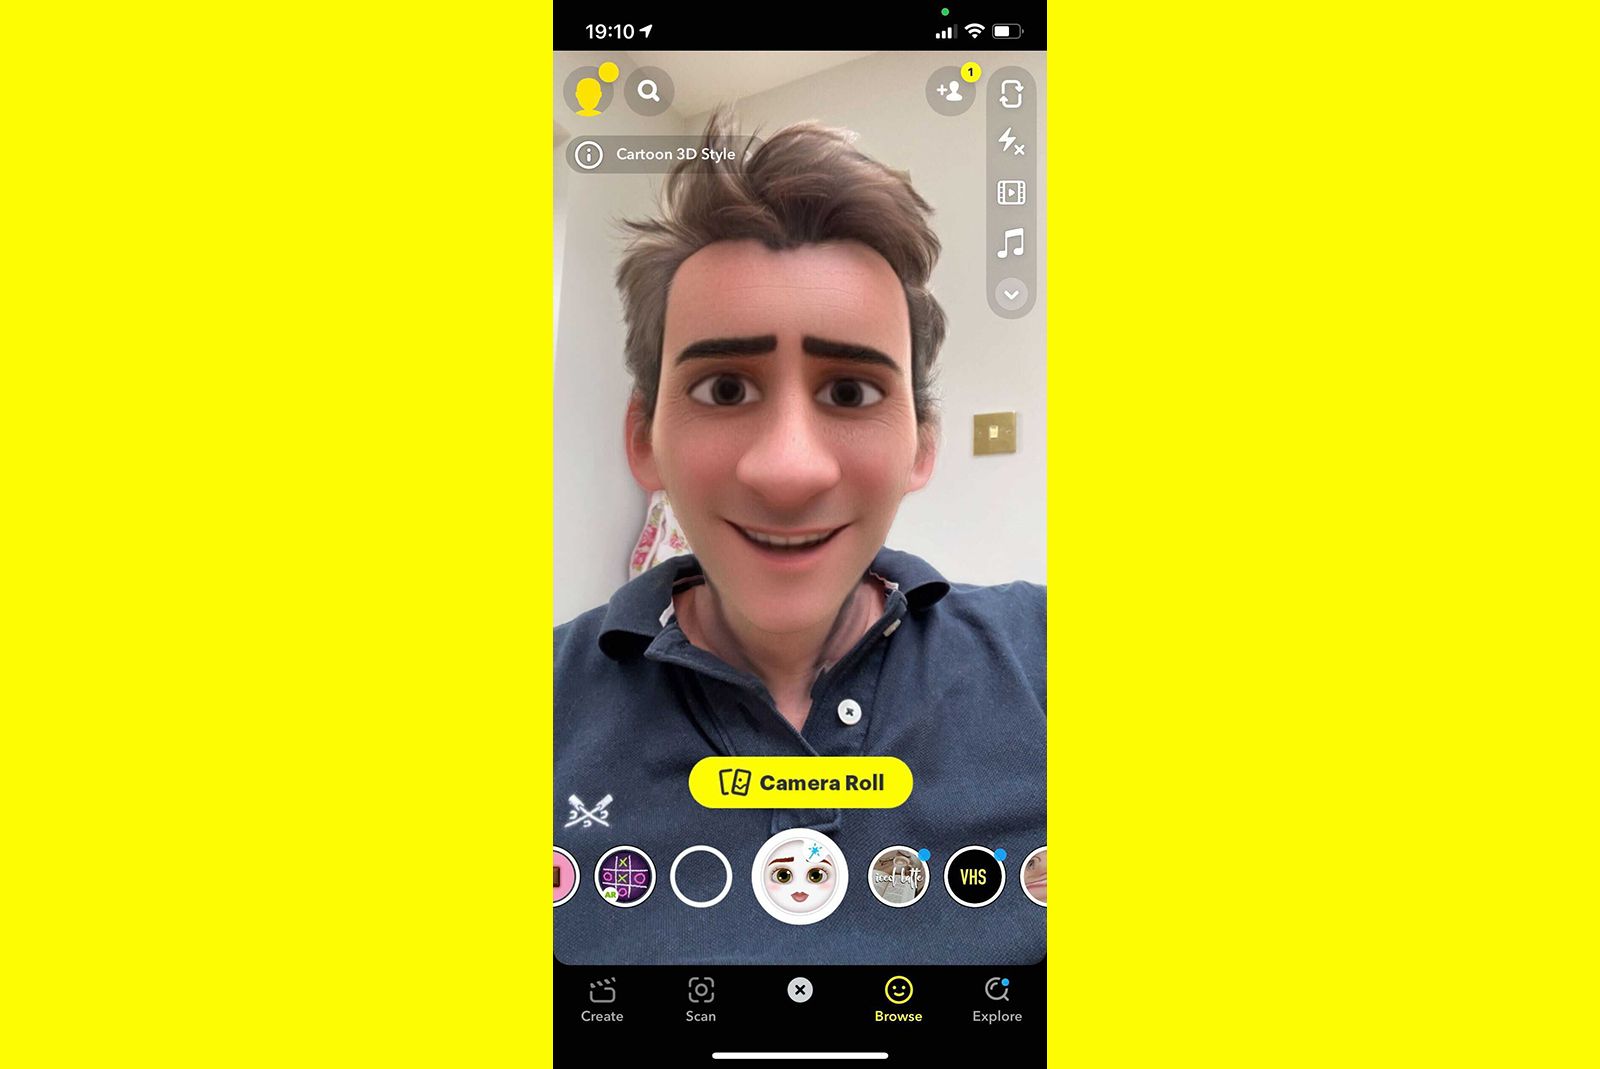 How to find and use Snapchat's cartoon lenses